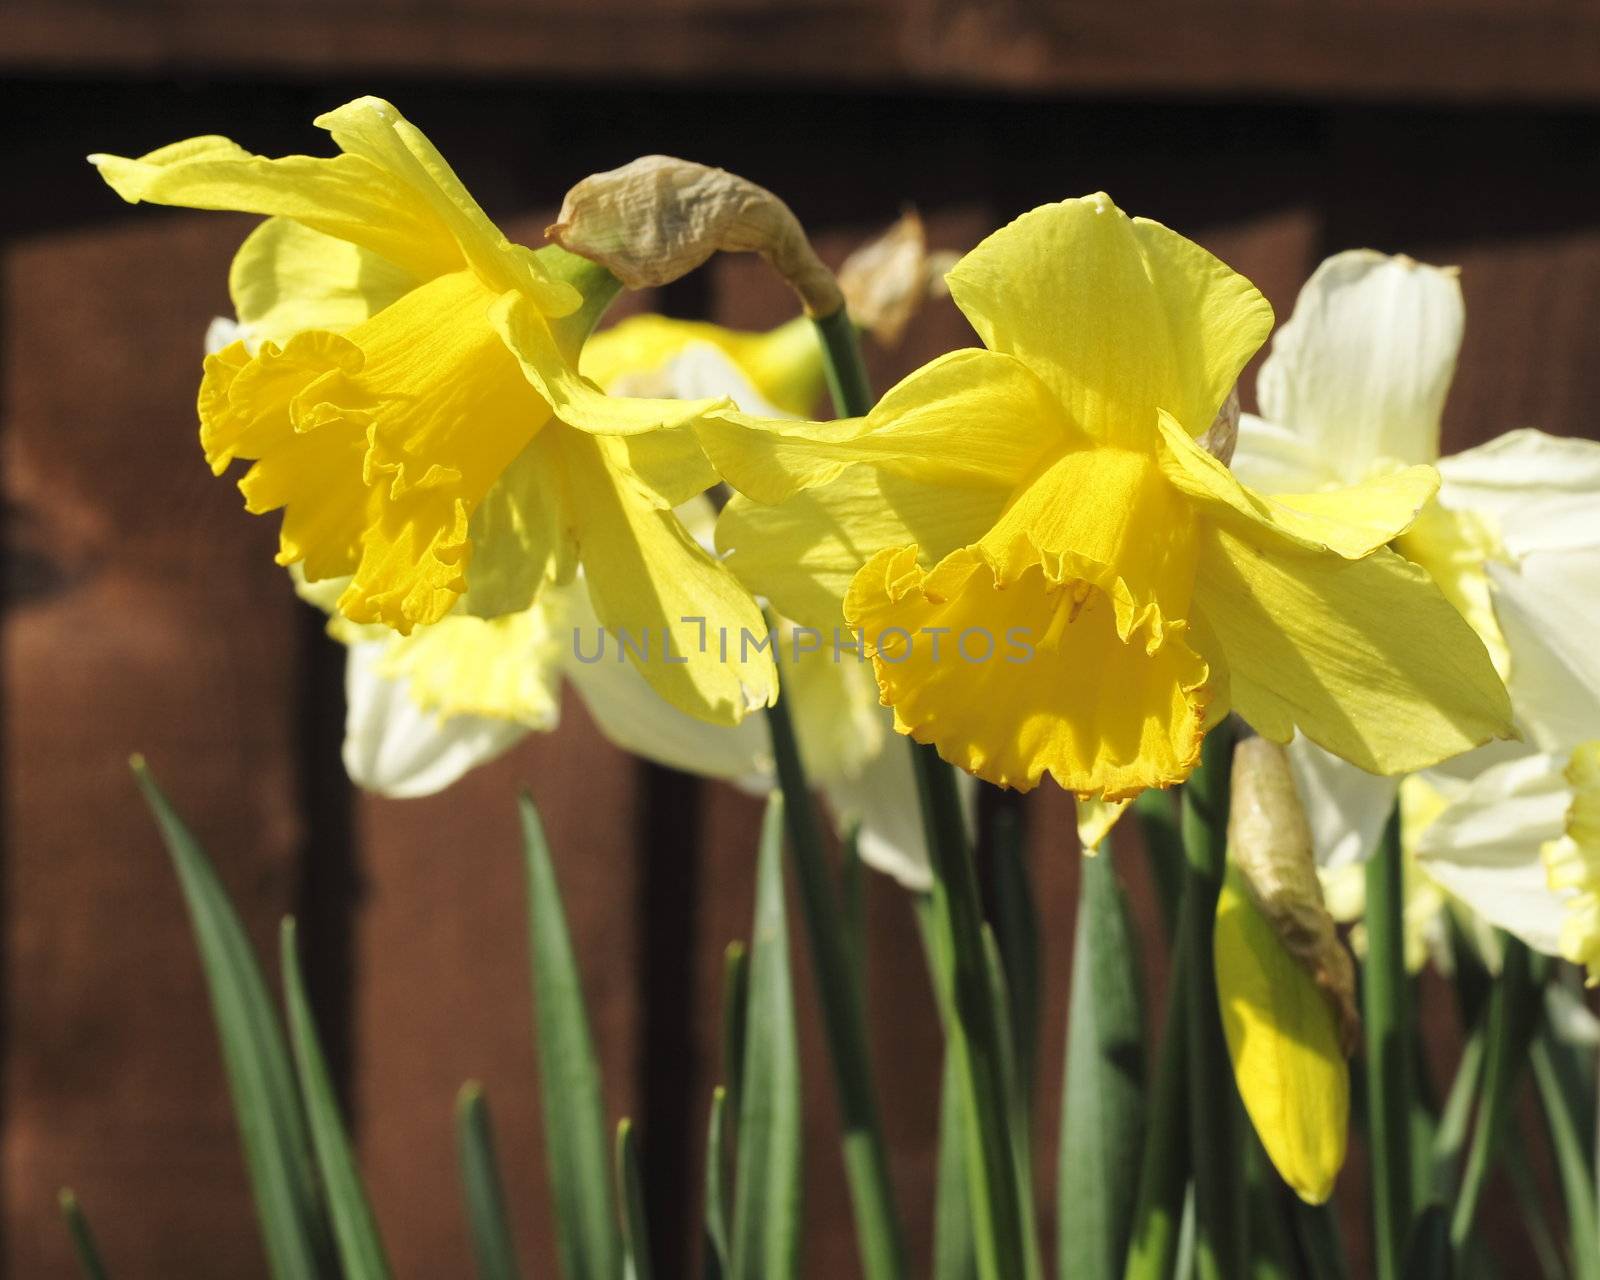 daffodils in the sunlight by leafy